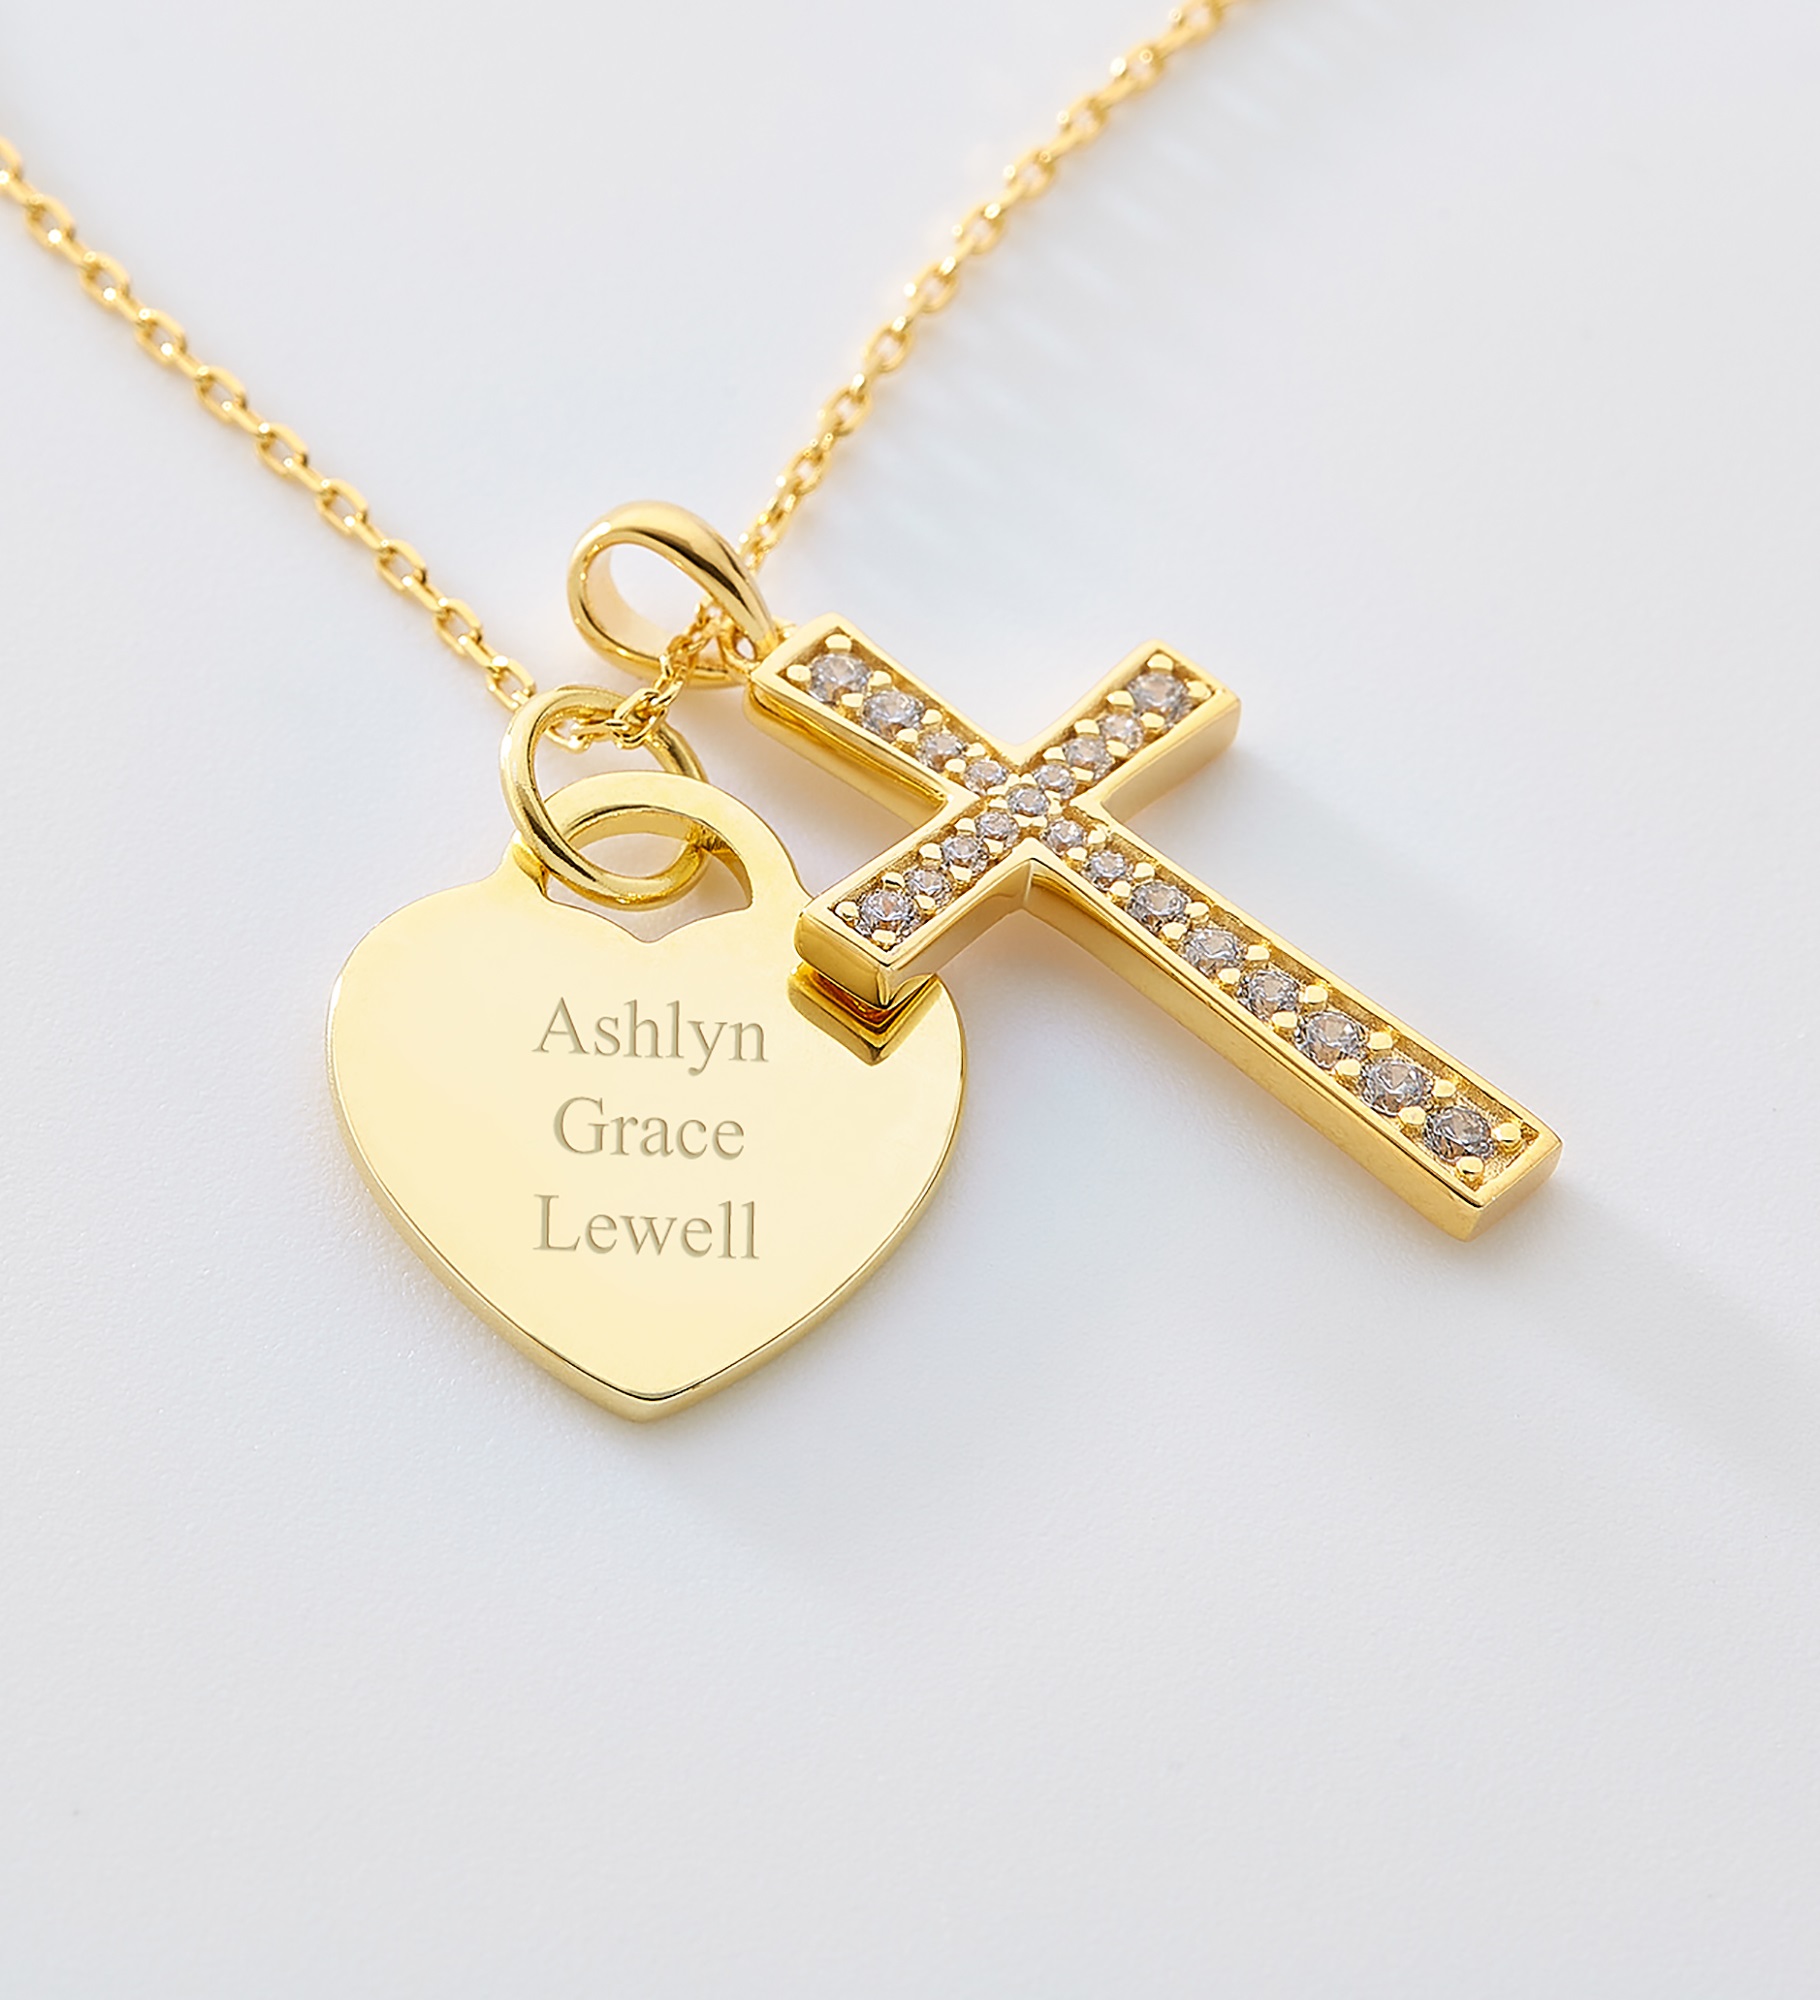  Engraved Heart and Cross Swing Gold/Sterling Silver Necklace